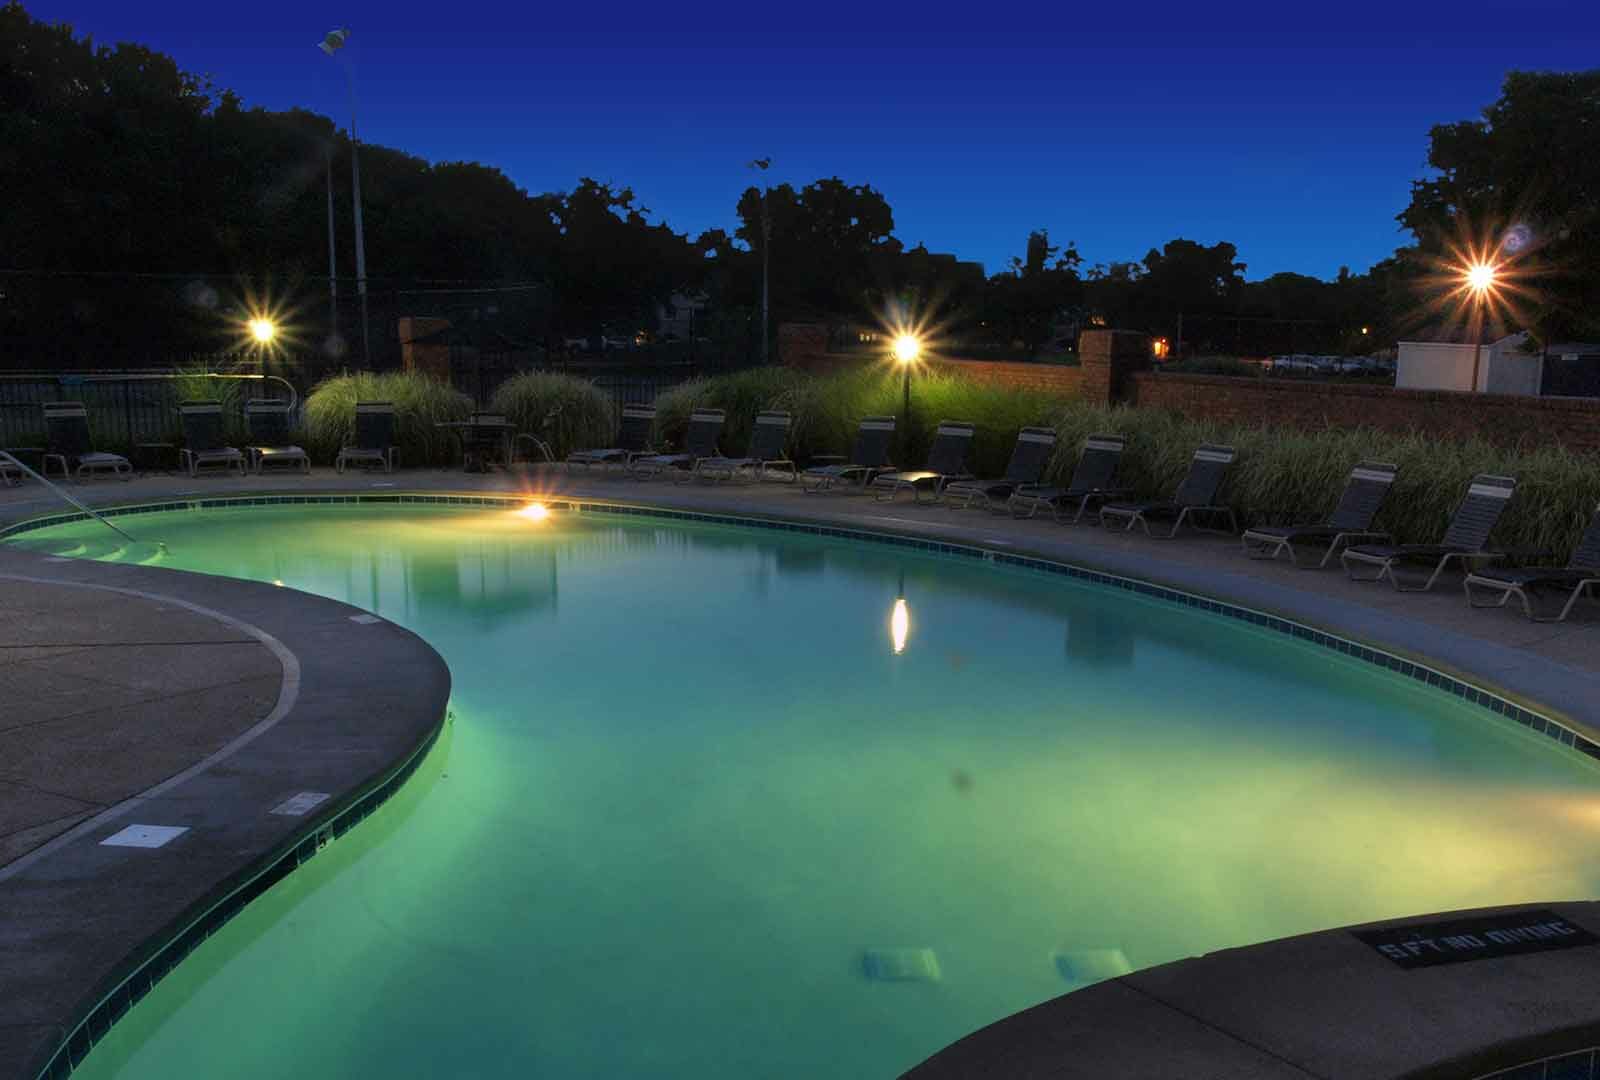 Outdoor pool with night lighting and lounge deck at Fox Chase North.